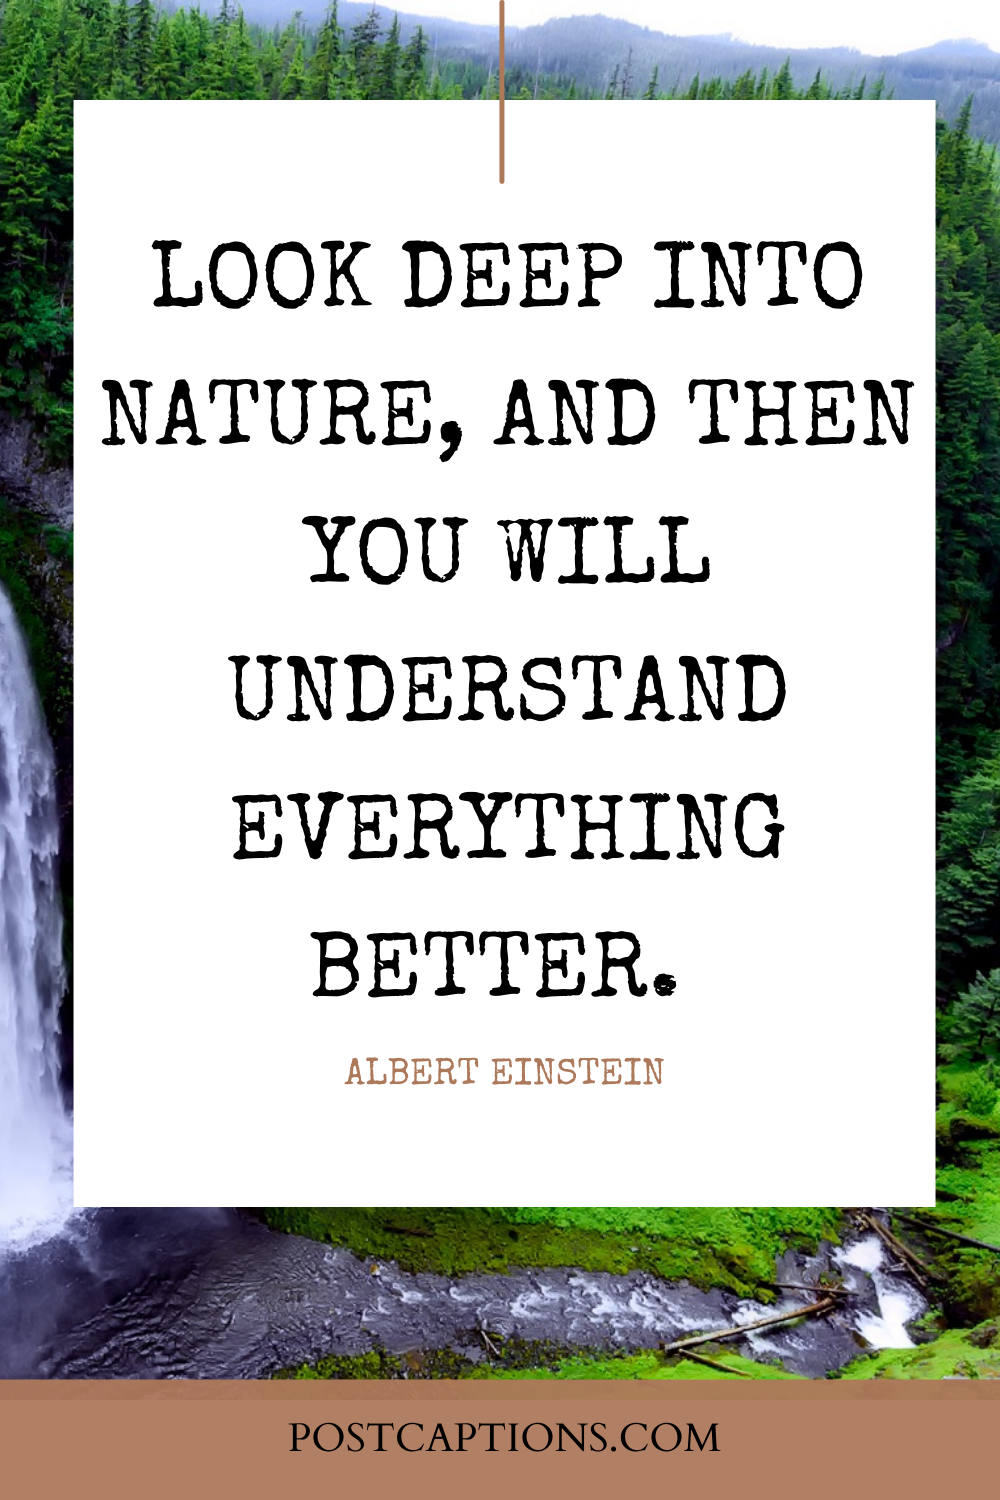 Nature quotes for Instagram